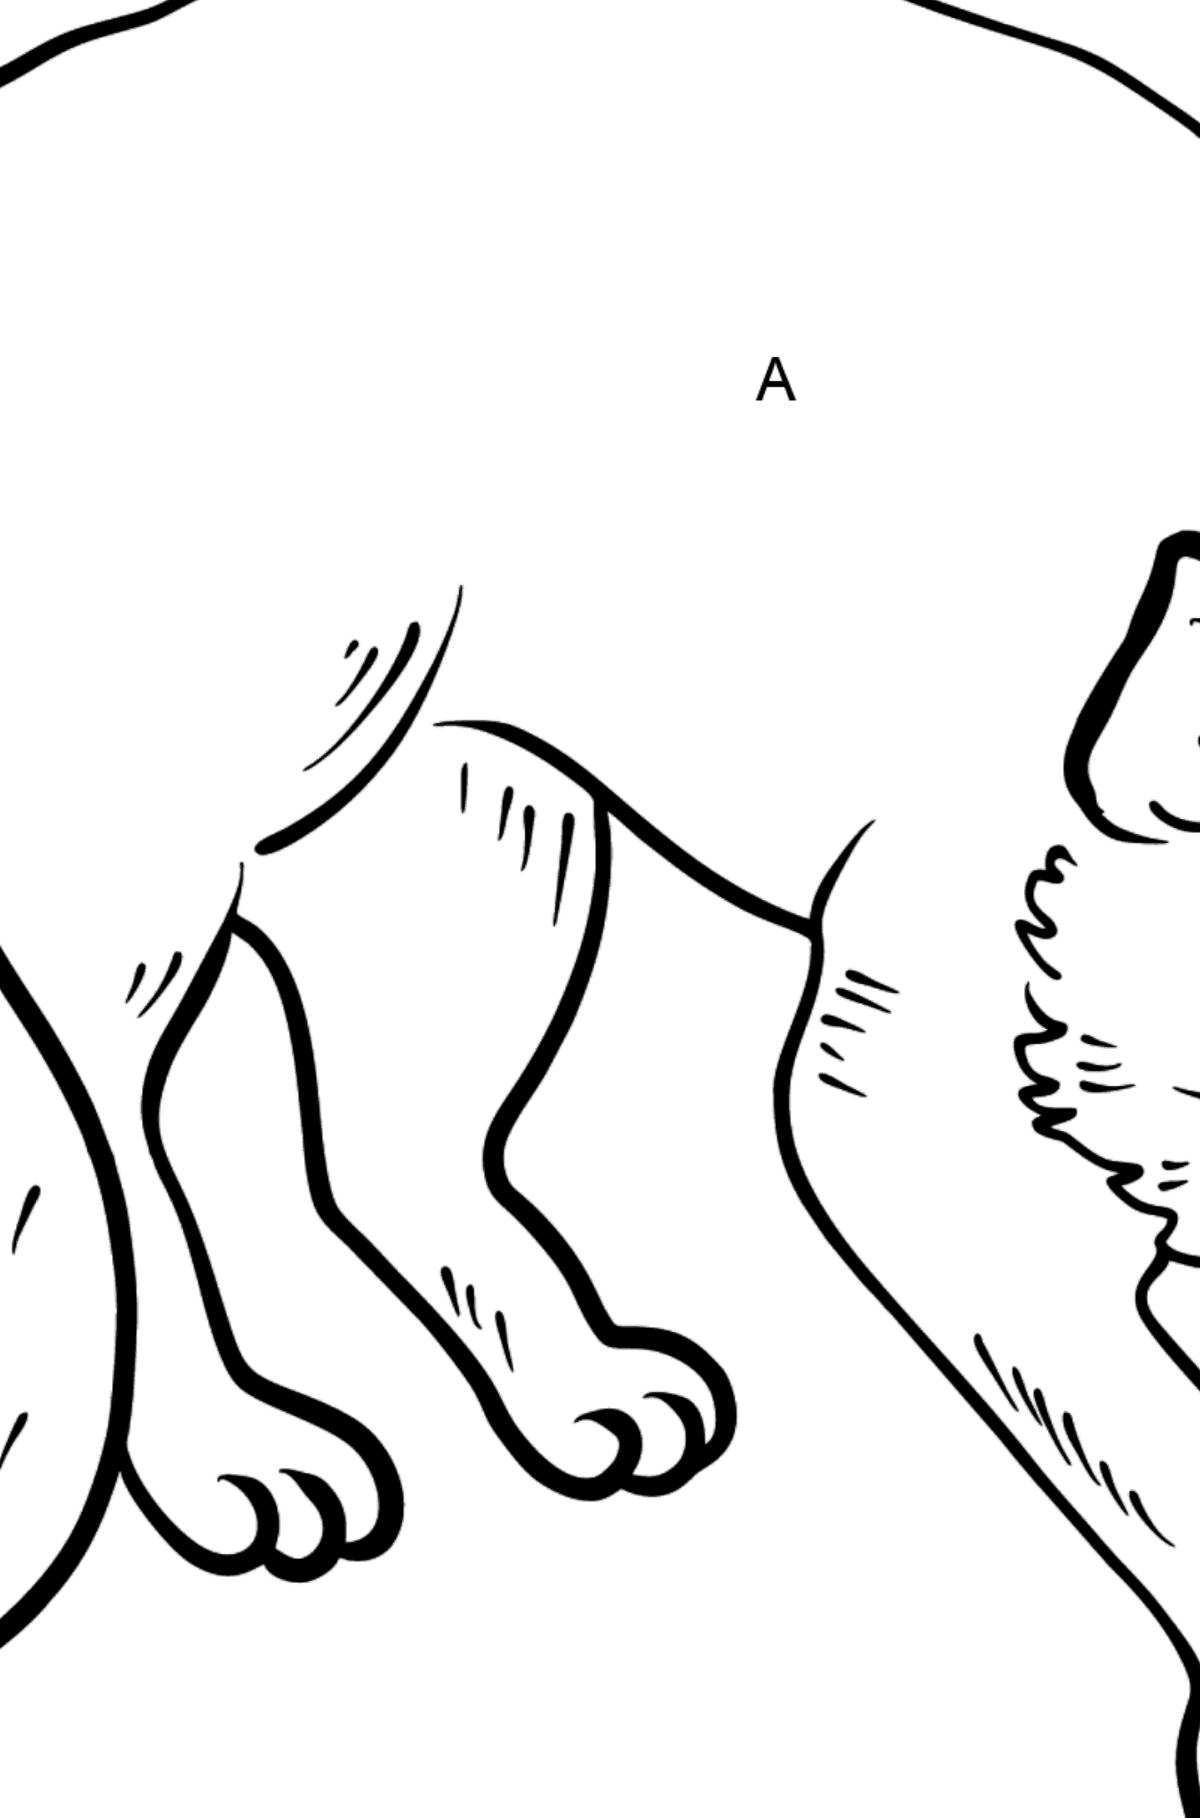 Fox coloring page - Coloring by Letters for Kids